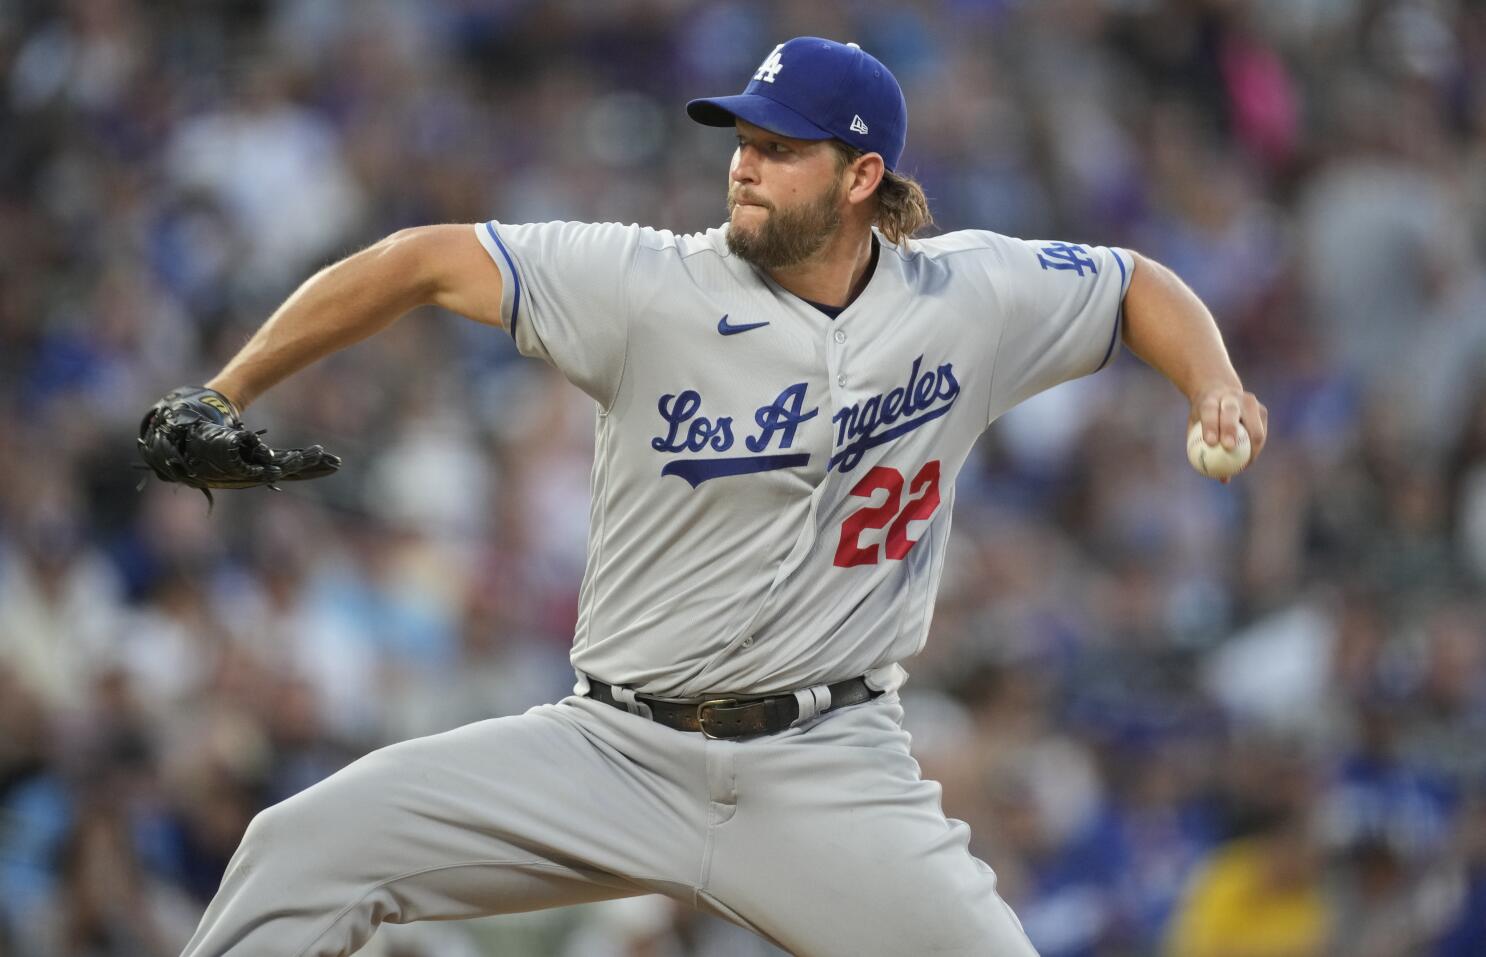 MLB ROUNDUP: Clayton Kershaw throws no-hitter for Dodgers in win